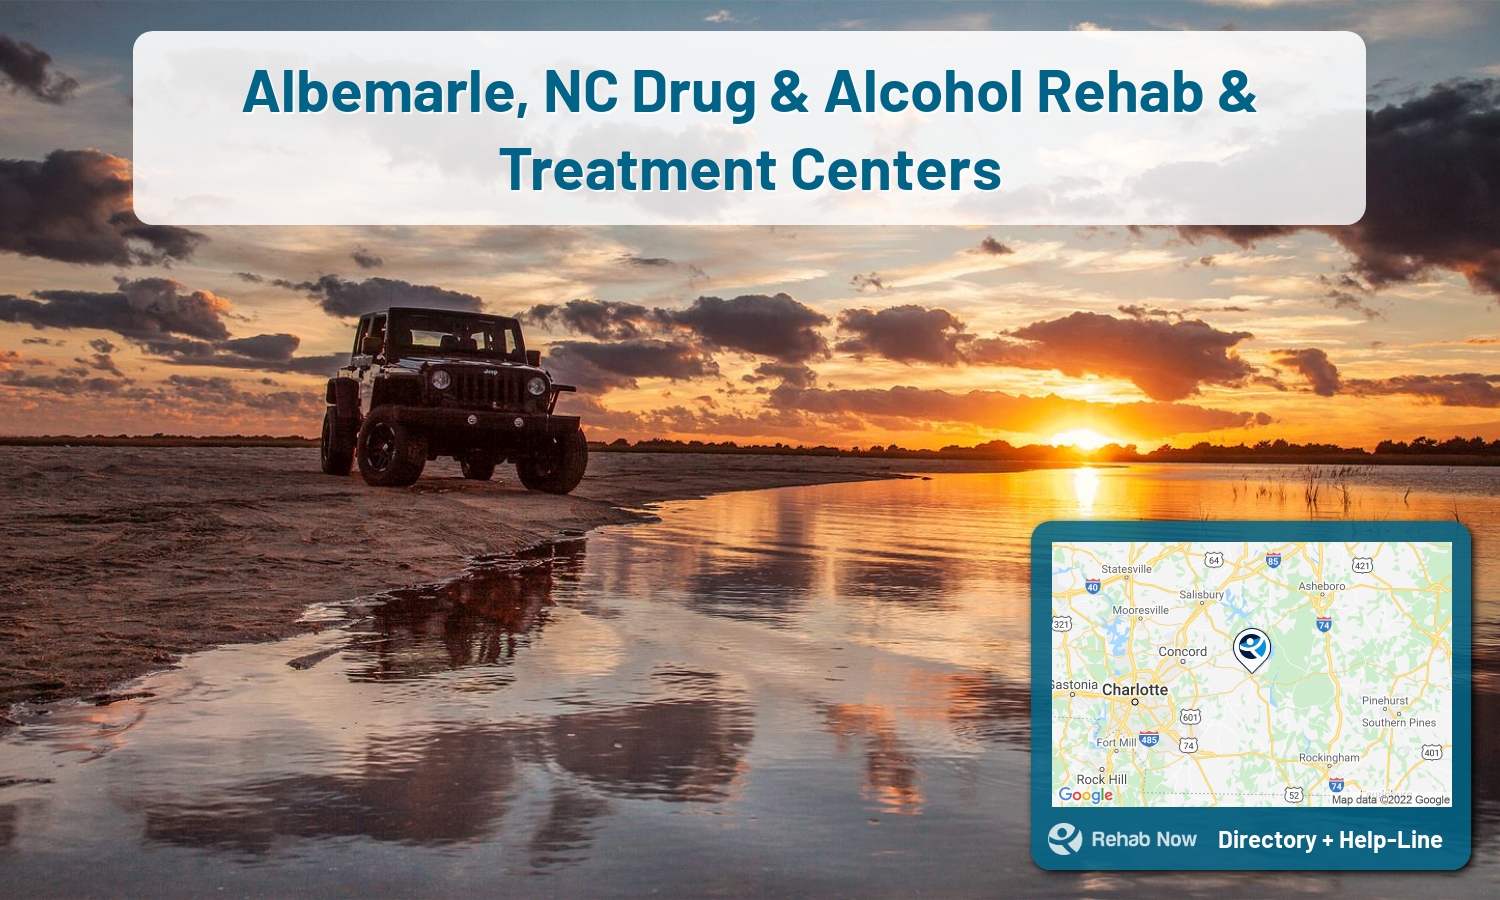 Albemarle, NC Treatment Centers. Find drug rehab in Albemarle, North Carolina, or detox and treatment programs. Get the right help now!